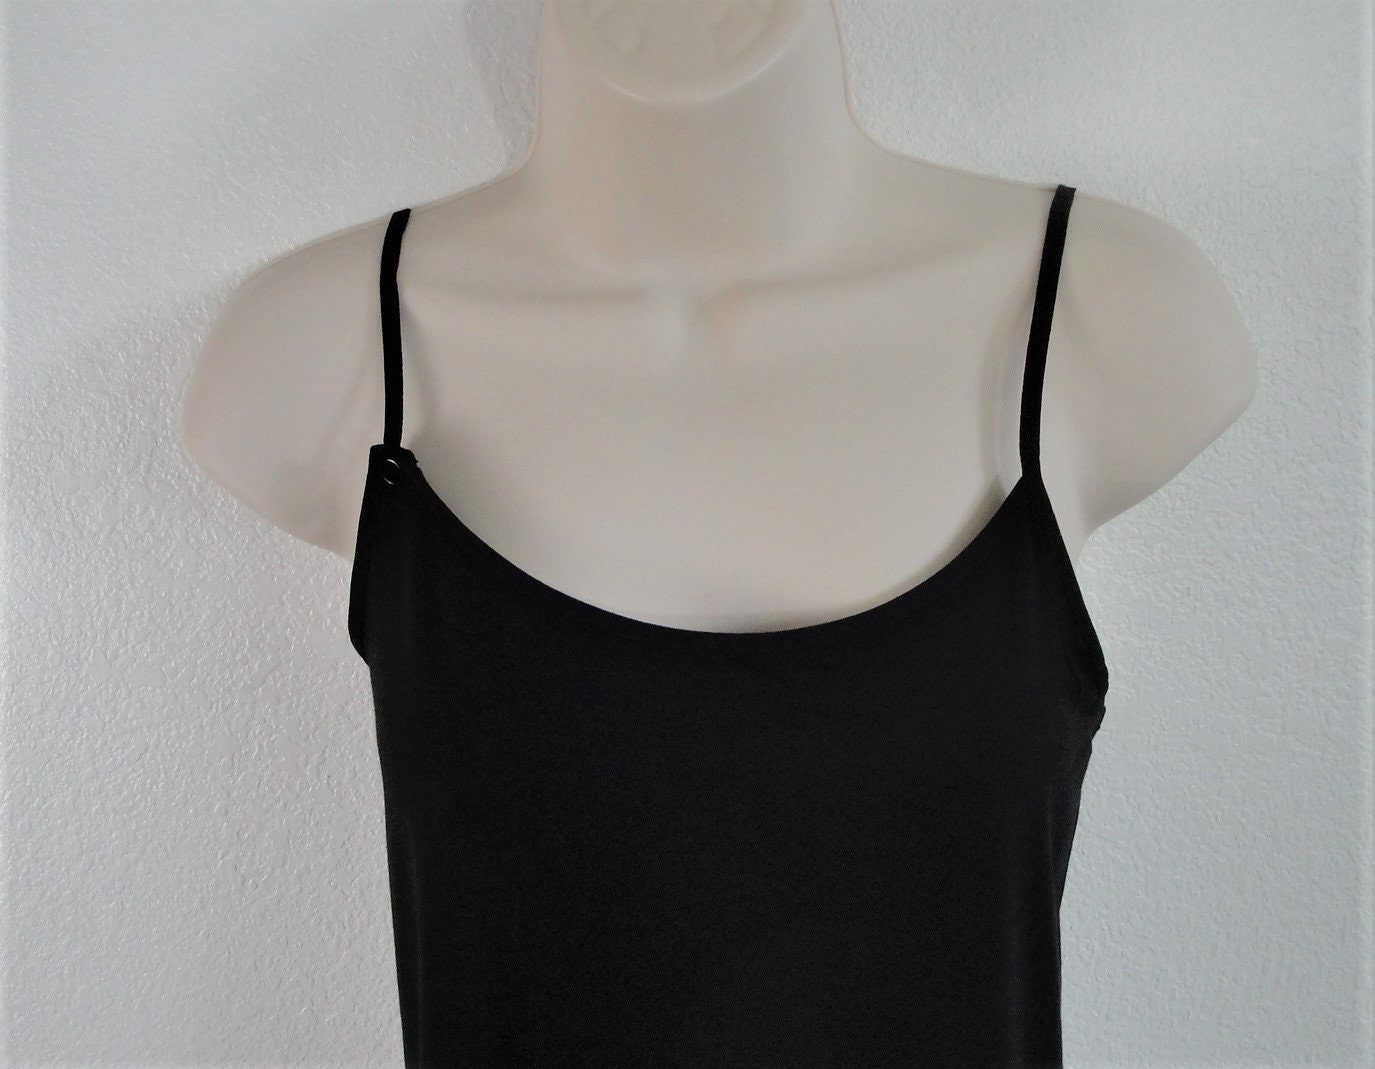 Post Mastectomy Surgery Recovery Shirt Lapel Collar Camisole